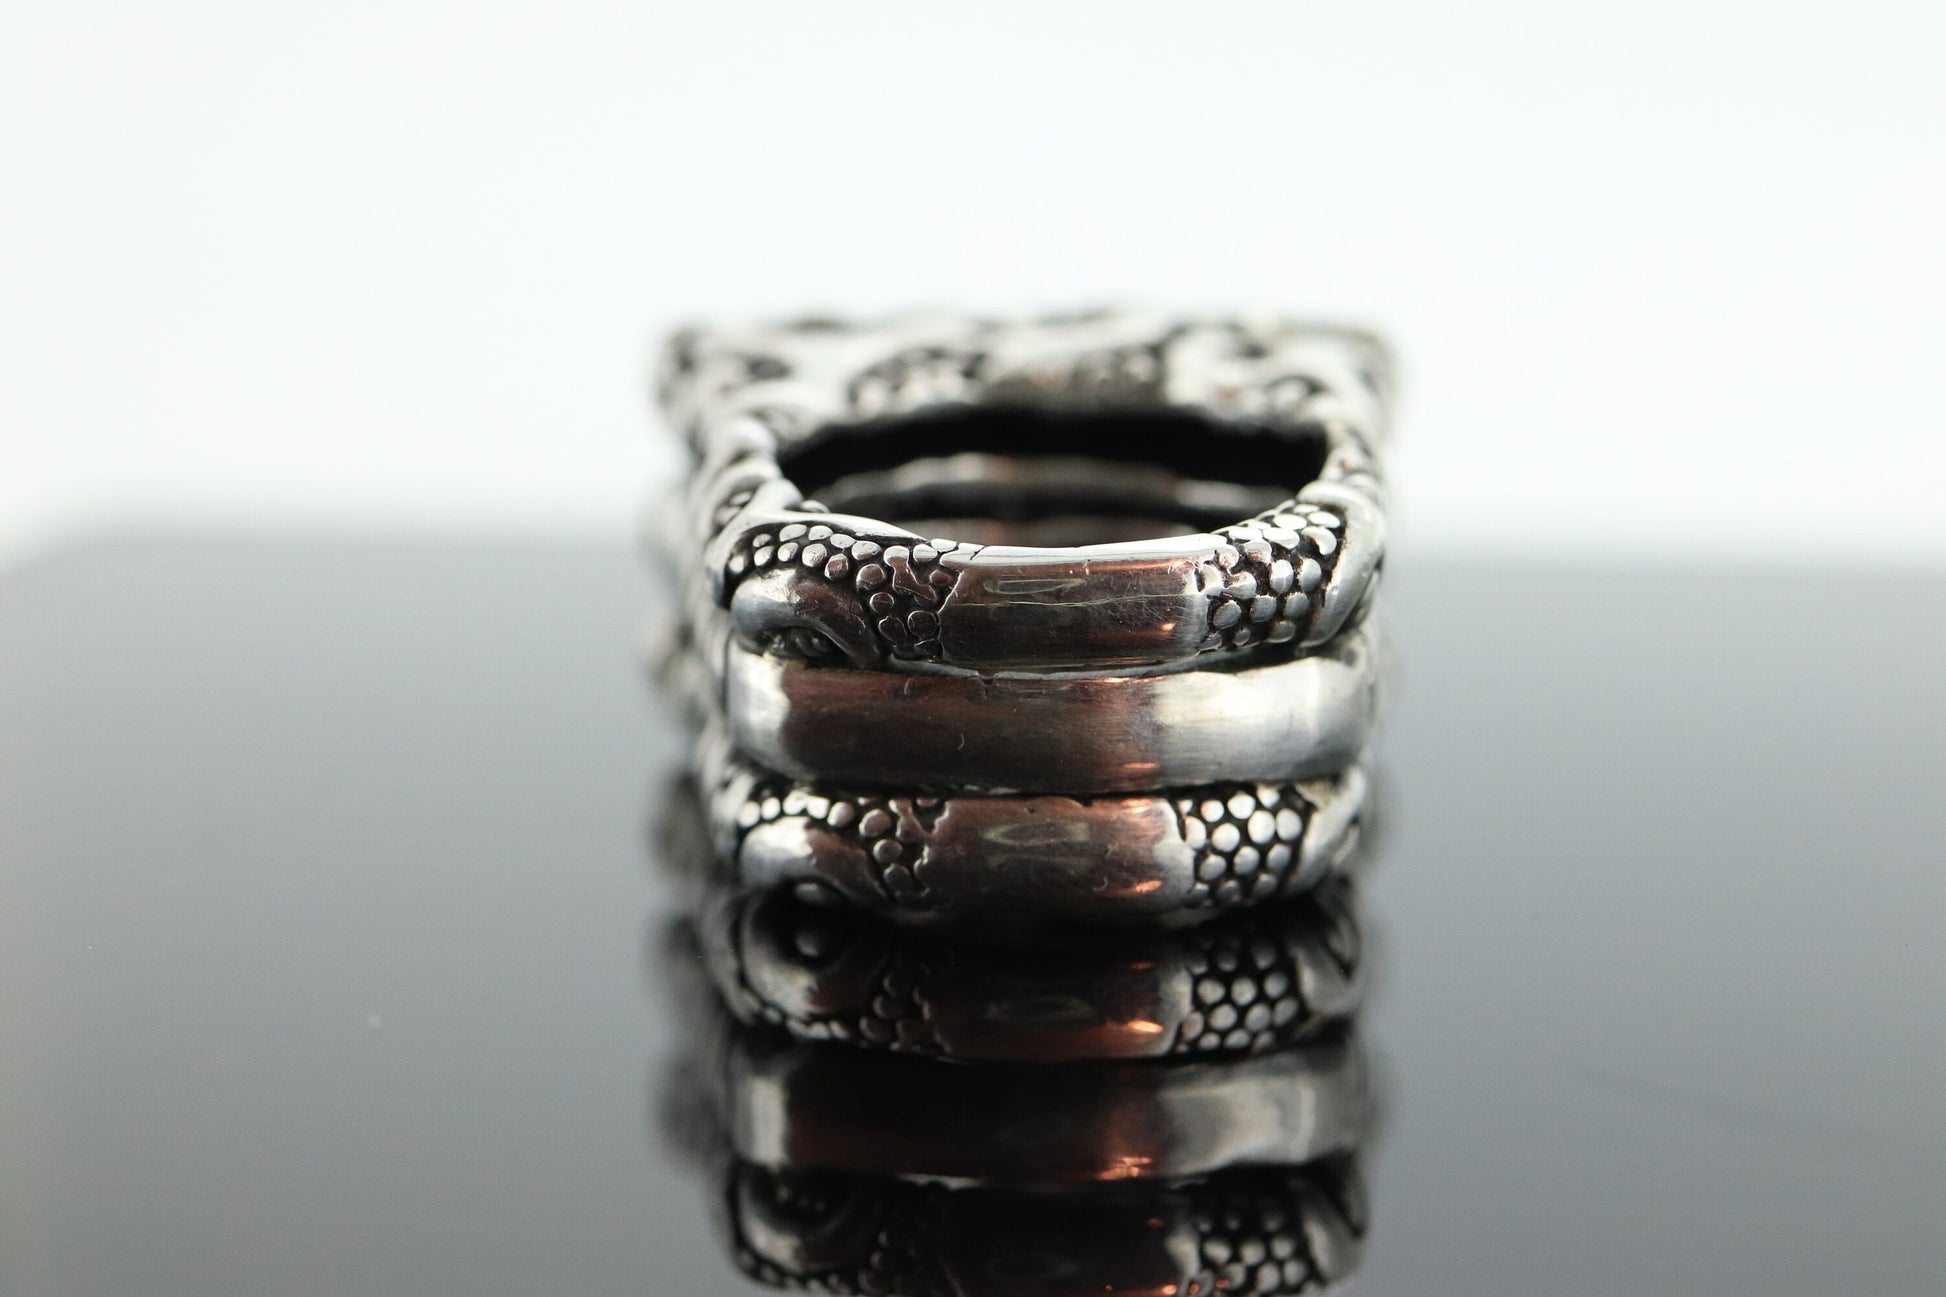 Dian Malouf RING. Triple Three Stacked Rings. Heavy sterling Silver and 14k Signet Rings DLM Collection (st114)